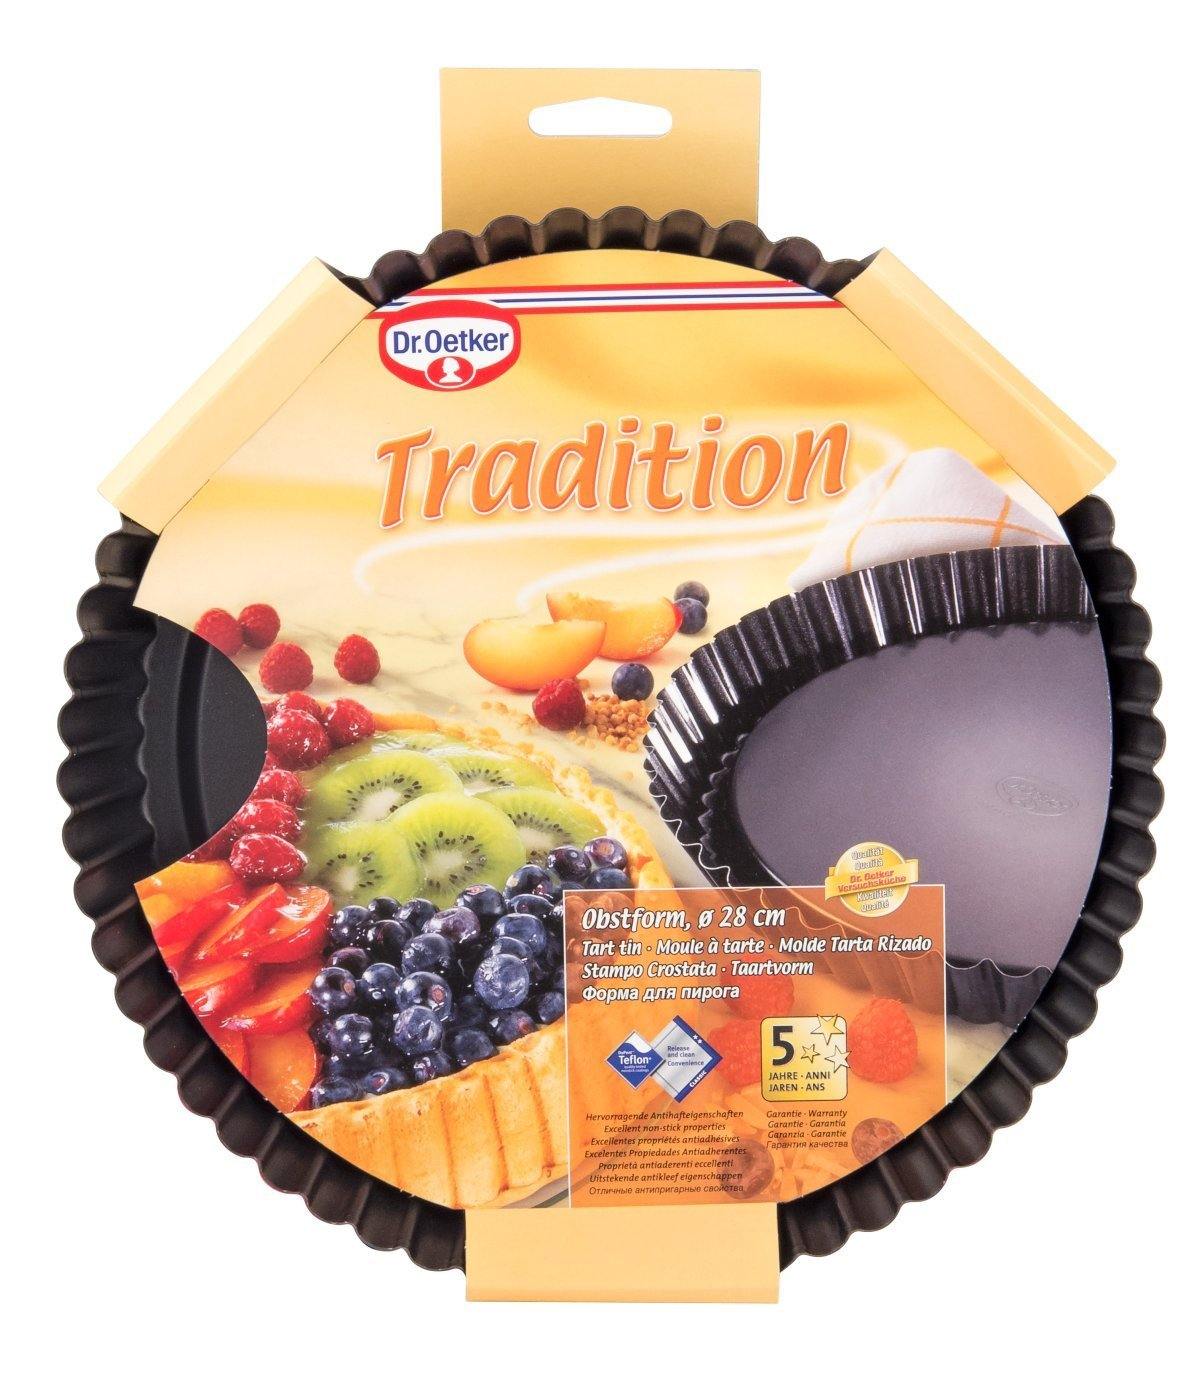 Dr. Oetker  "Tradition" Non-Stick Bakeware Flan Tin - Whole and All